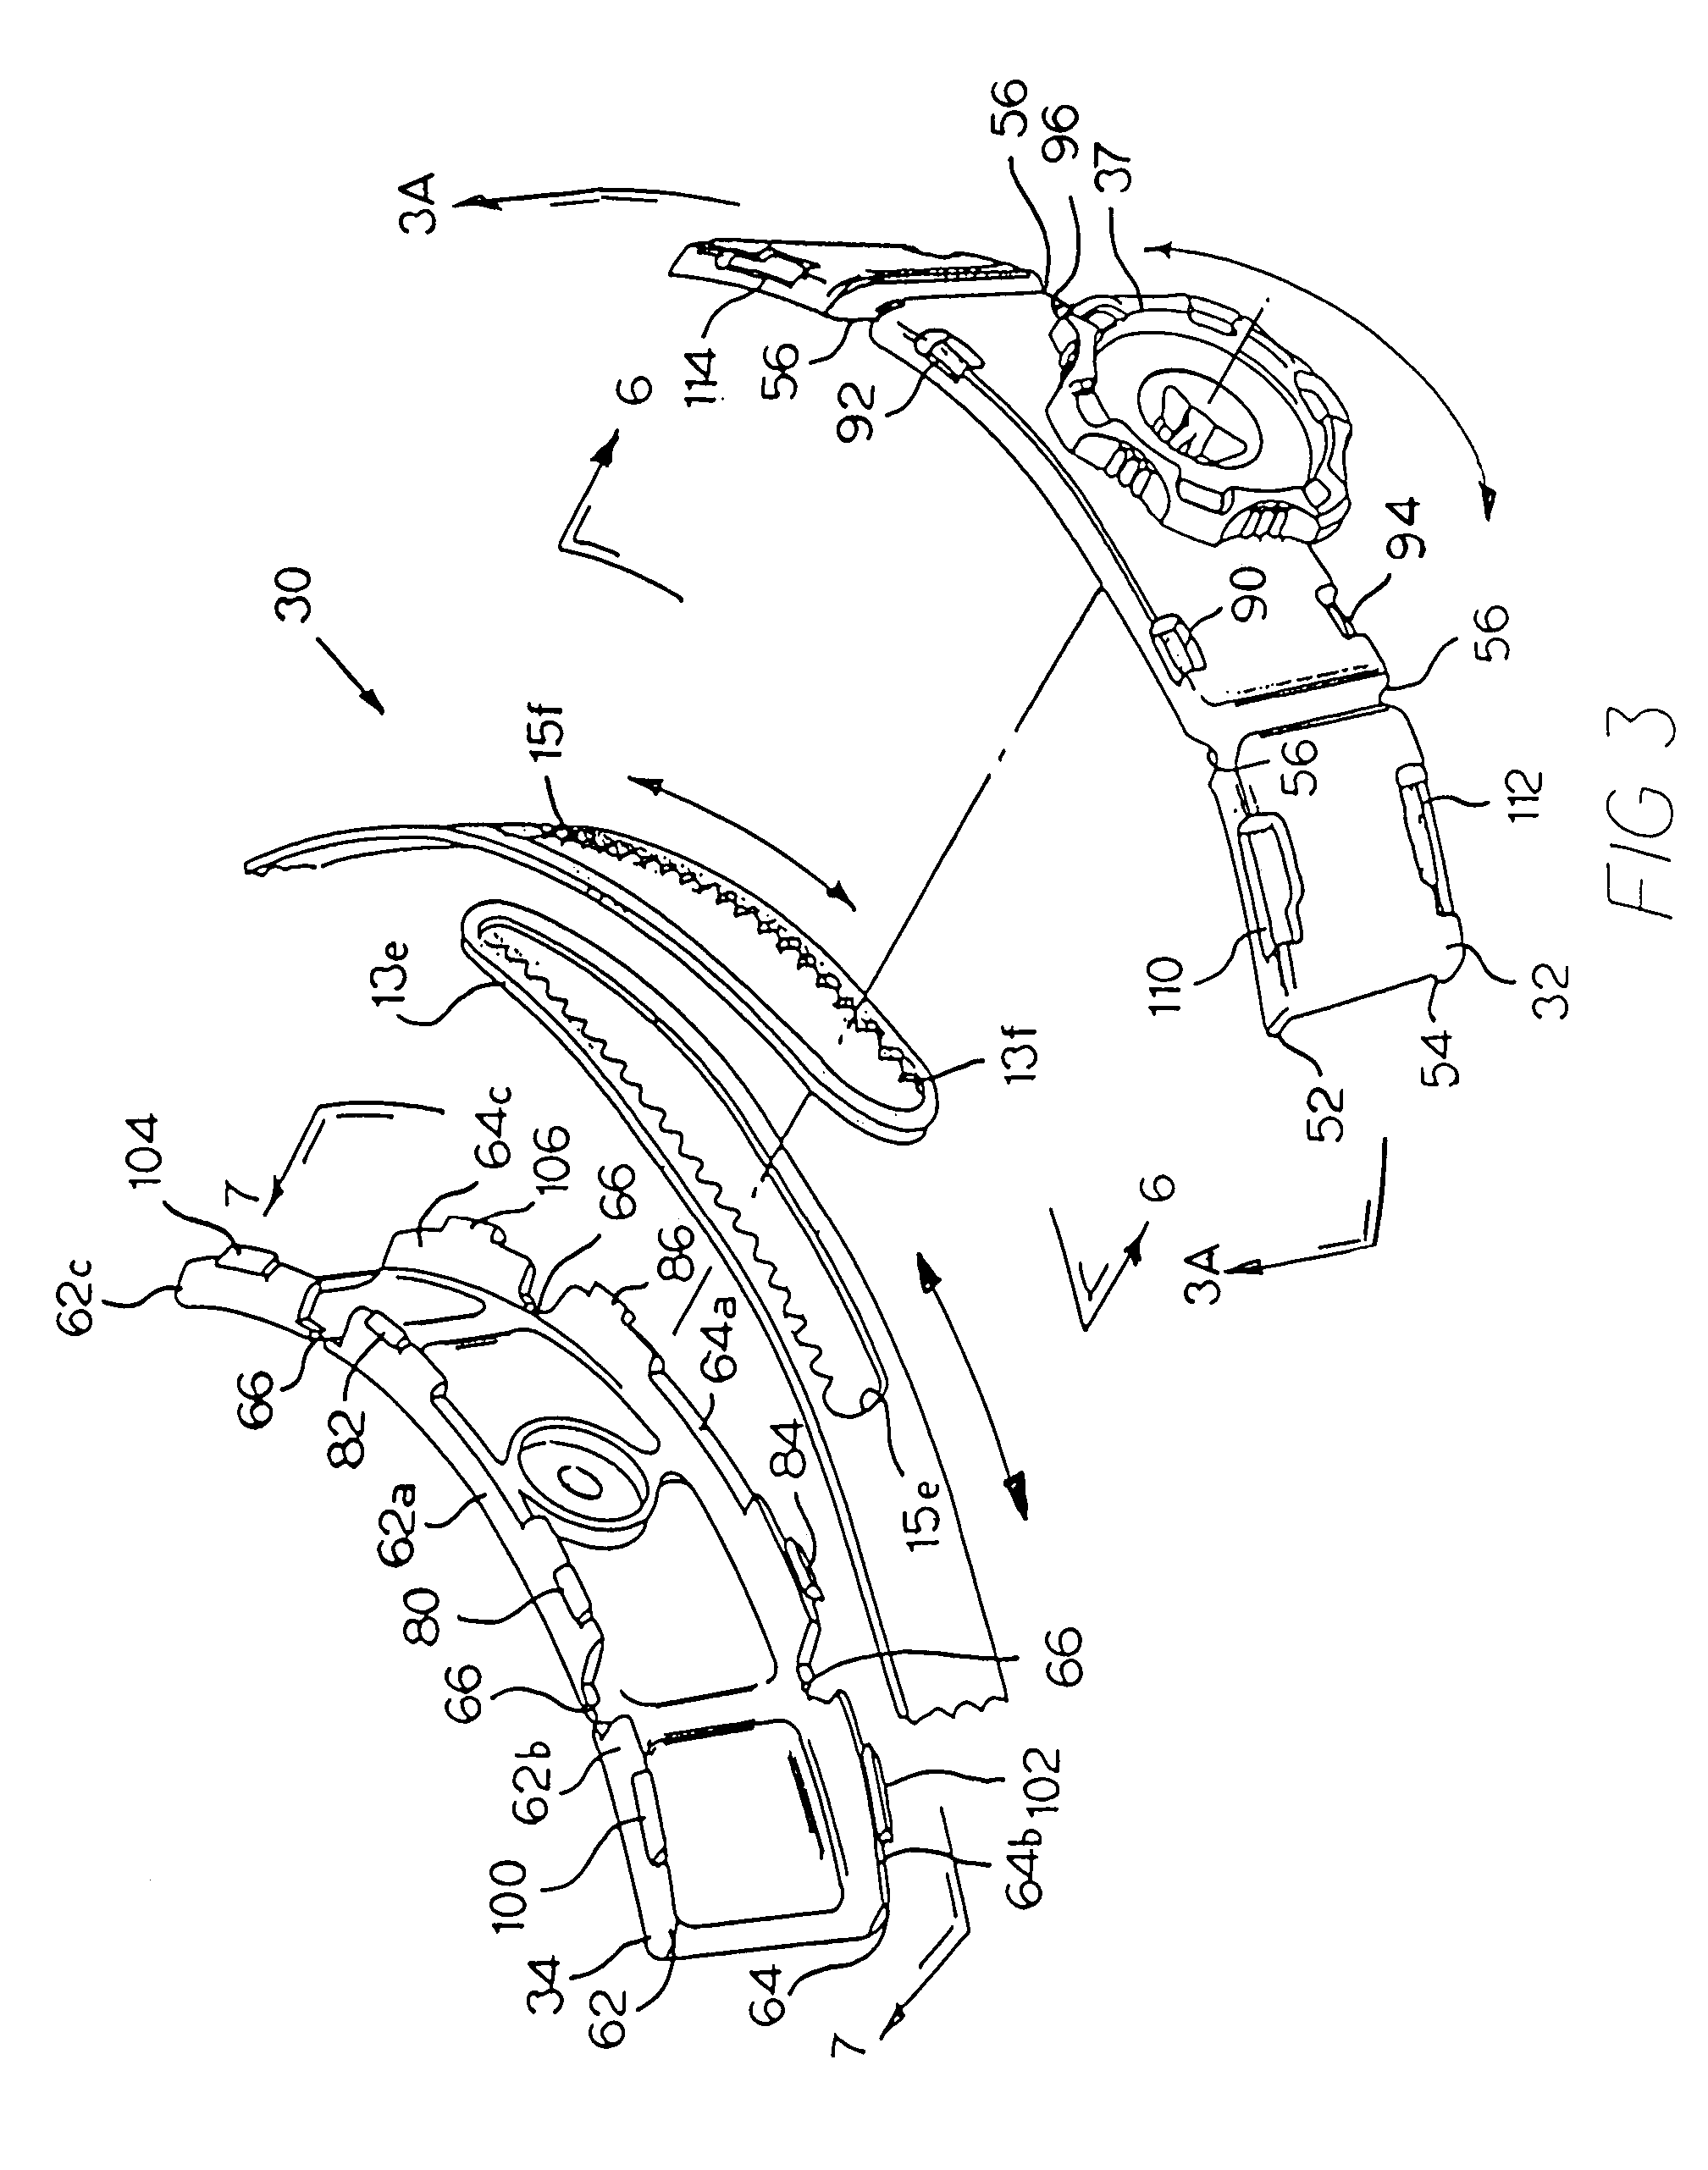 Ratchet mechanism with unitary knob and pinion construction